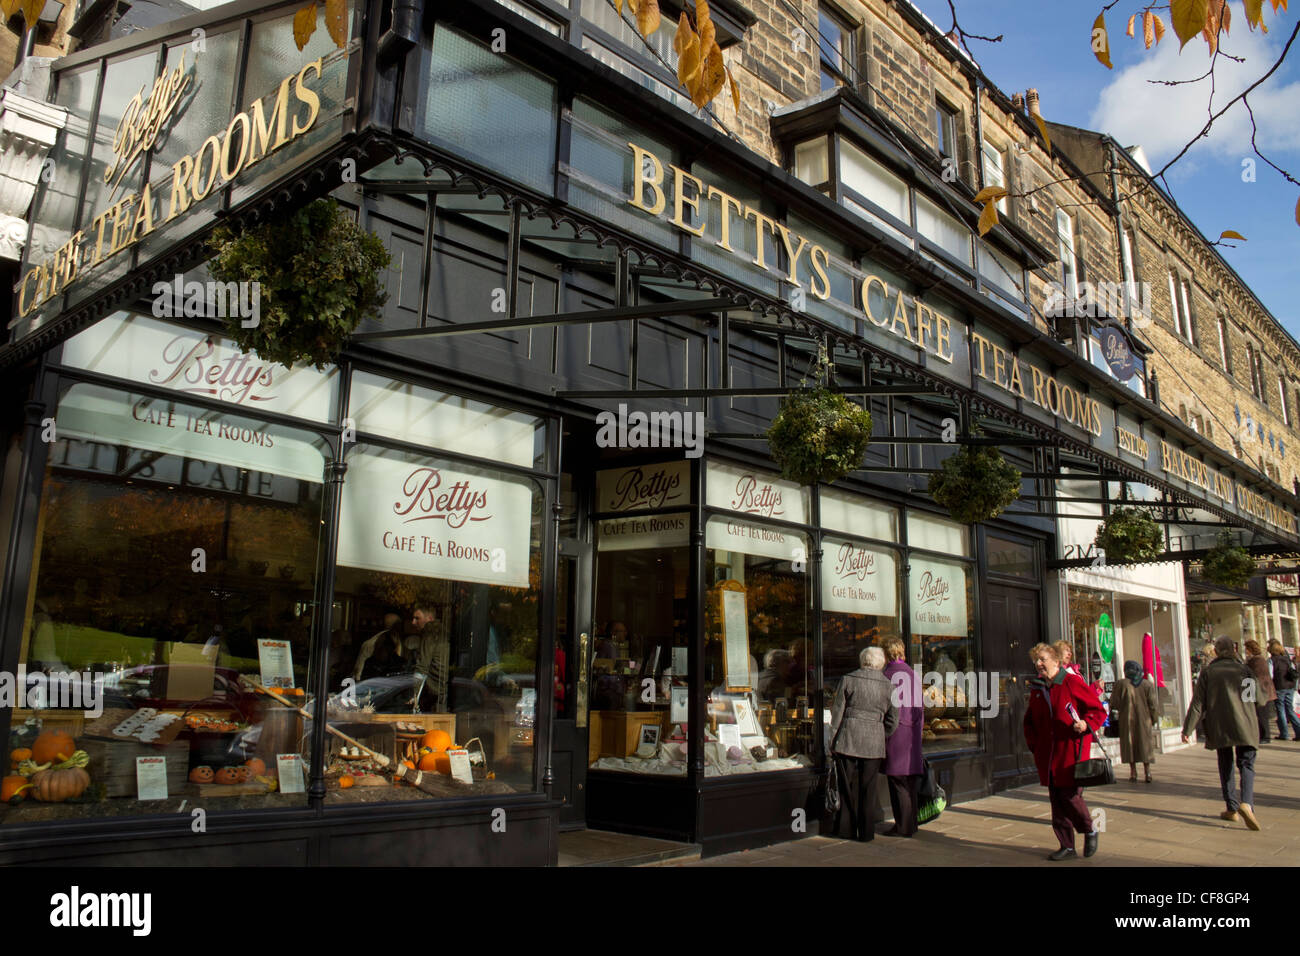 Bettys Cafe and Tea Room, Ilkley West Yorkshire. Stock Photo